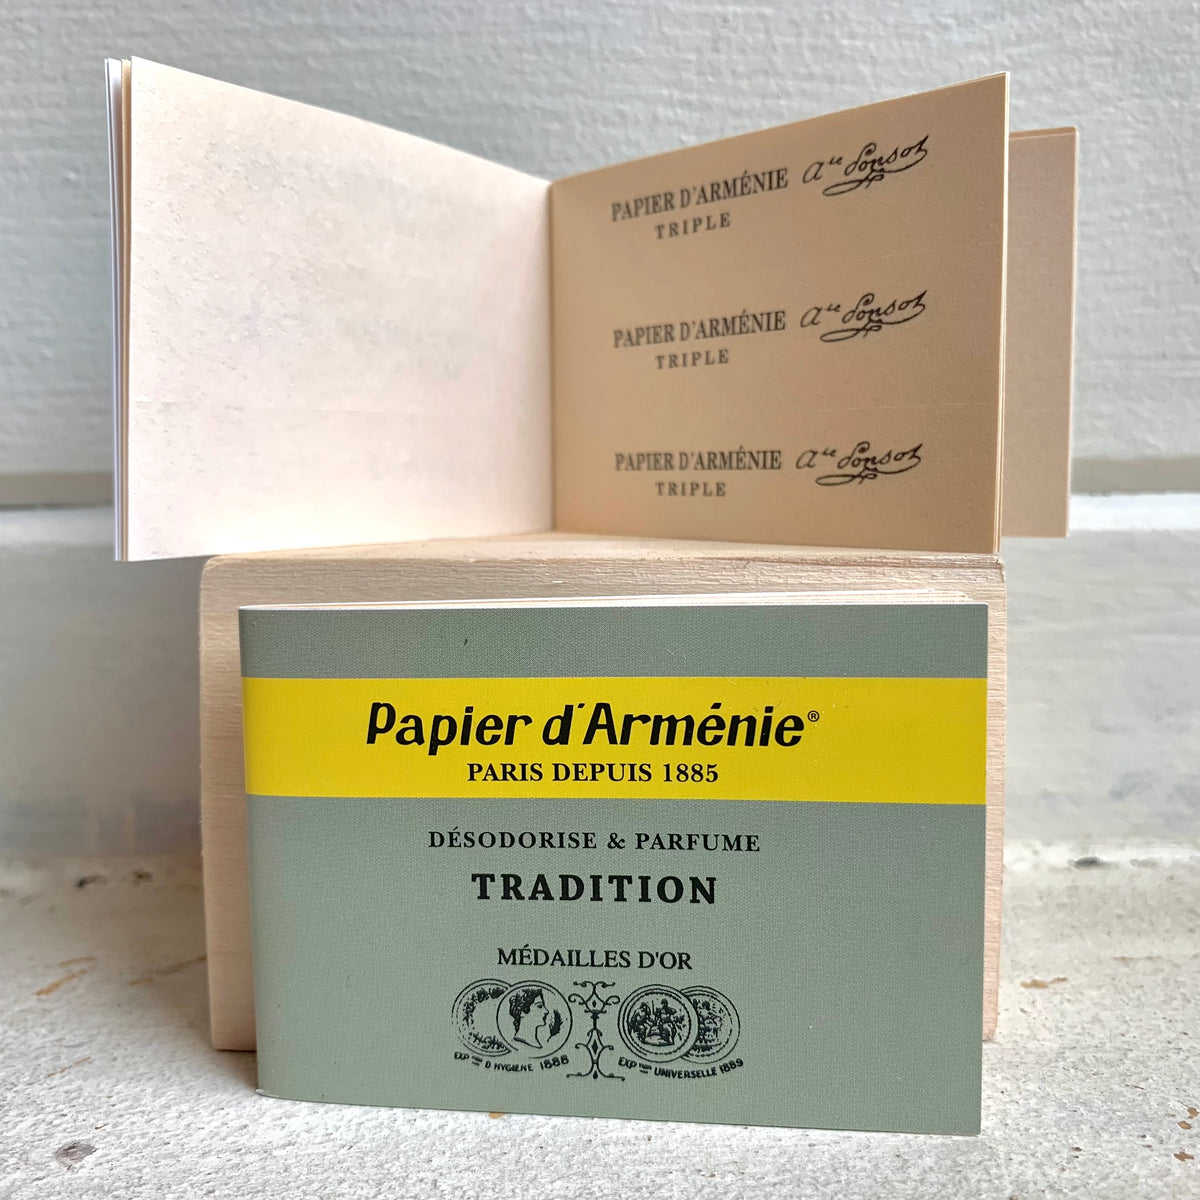 Incense Made in France — design solutions